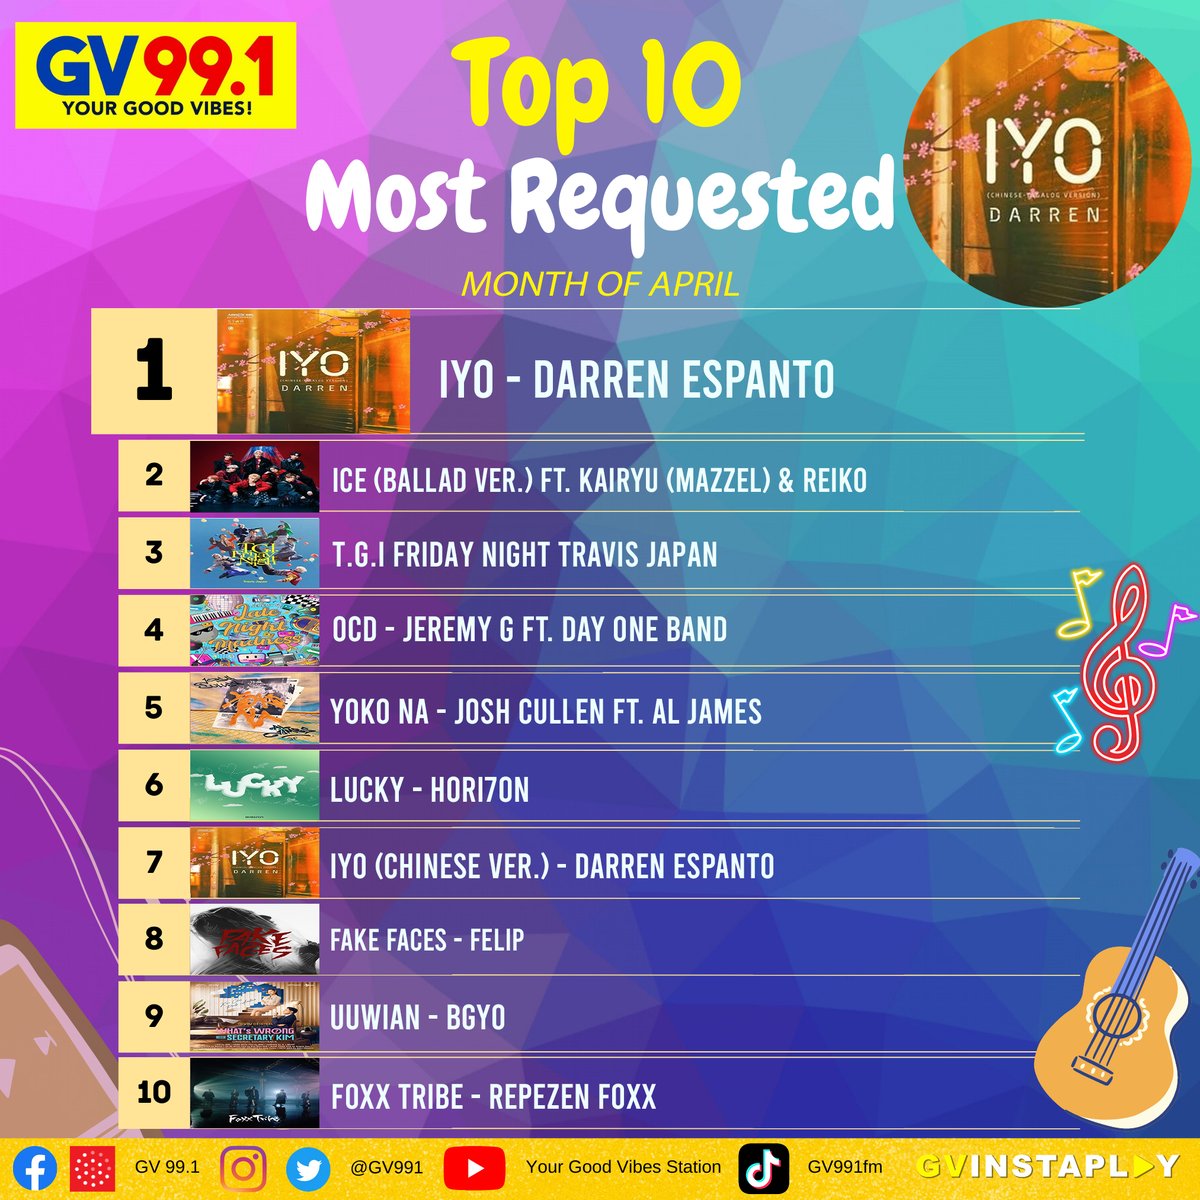 GV Instaplay’s most requested track for the month of April is here! #DarrenEspanto’s Iyo reached the #1 spot while #MAZZEL_KAIRYU & #Reiko’s Ice (Ballad Ver.) and #TravisJapan’s T. G. I Friday Night placed 2nd & 3rd 📷 #GVInstaplayNow #GVInstaplay #GV991 #DJClyde #BuzzPop